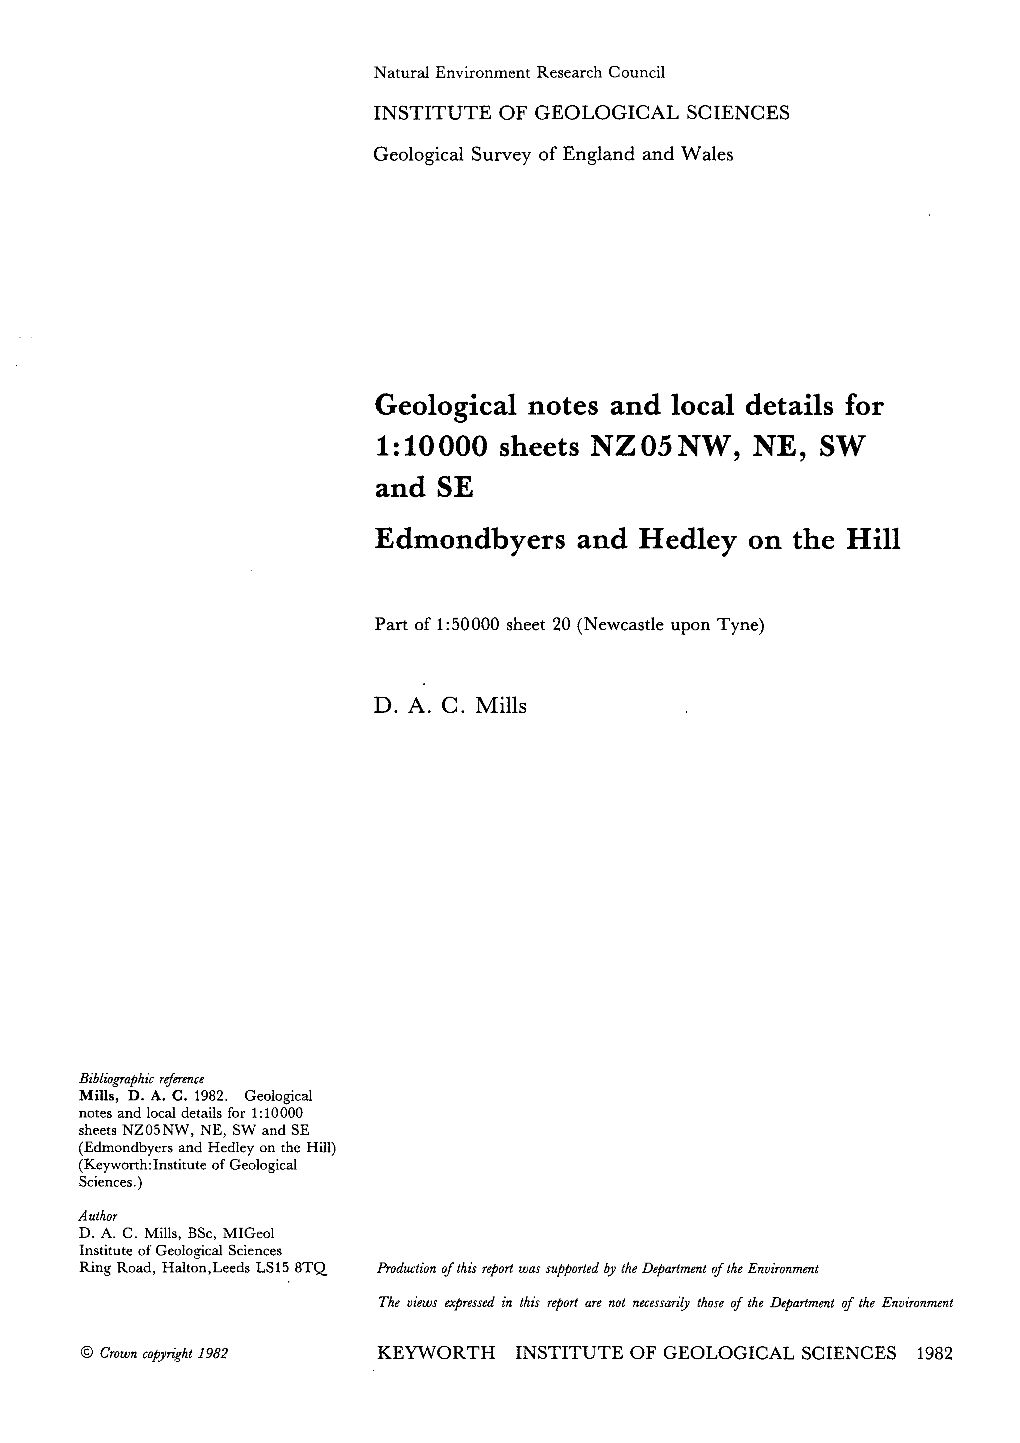 WA/DM/82/53 Geological Notes and Local Details for 1:10 000 Sheets NZ05NW, NE, SW and SE Edmondbyers and Hedley on the Hill: Pa